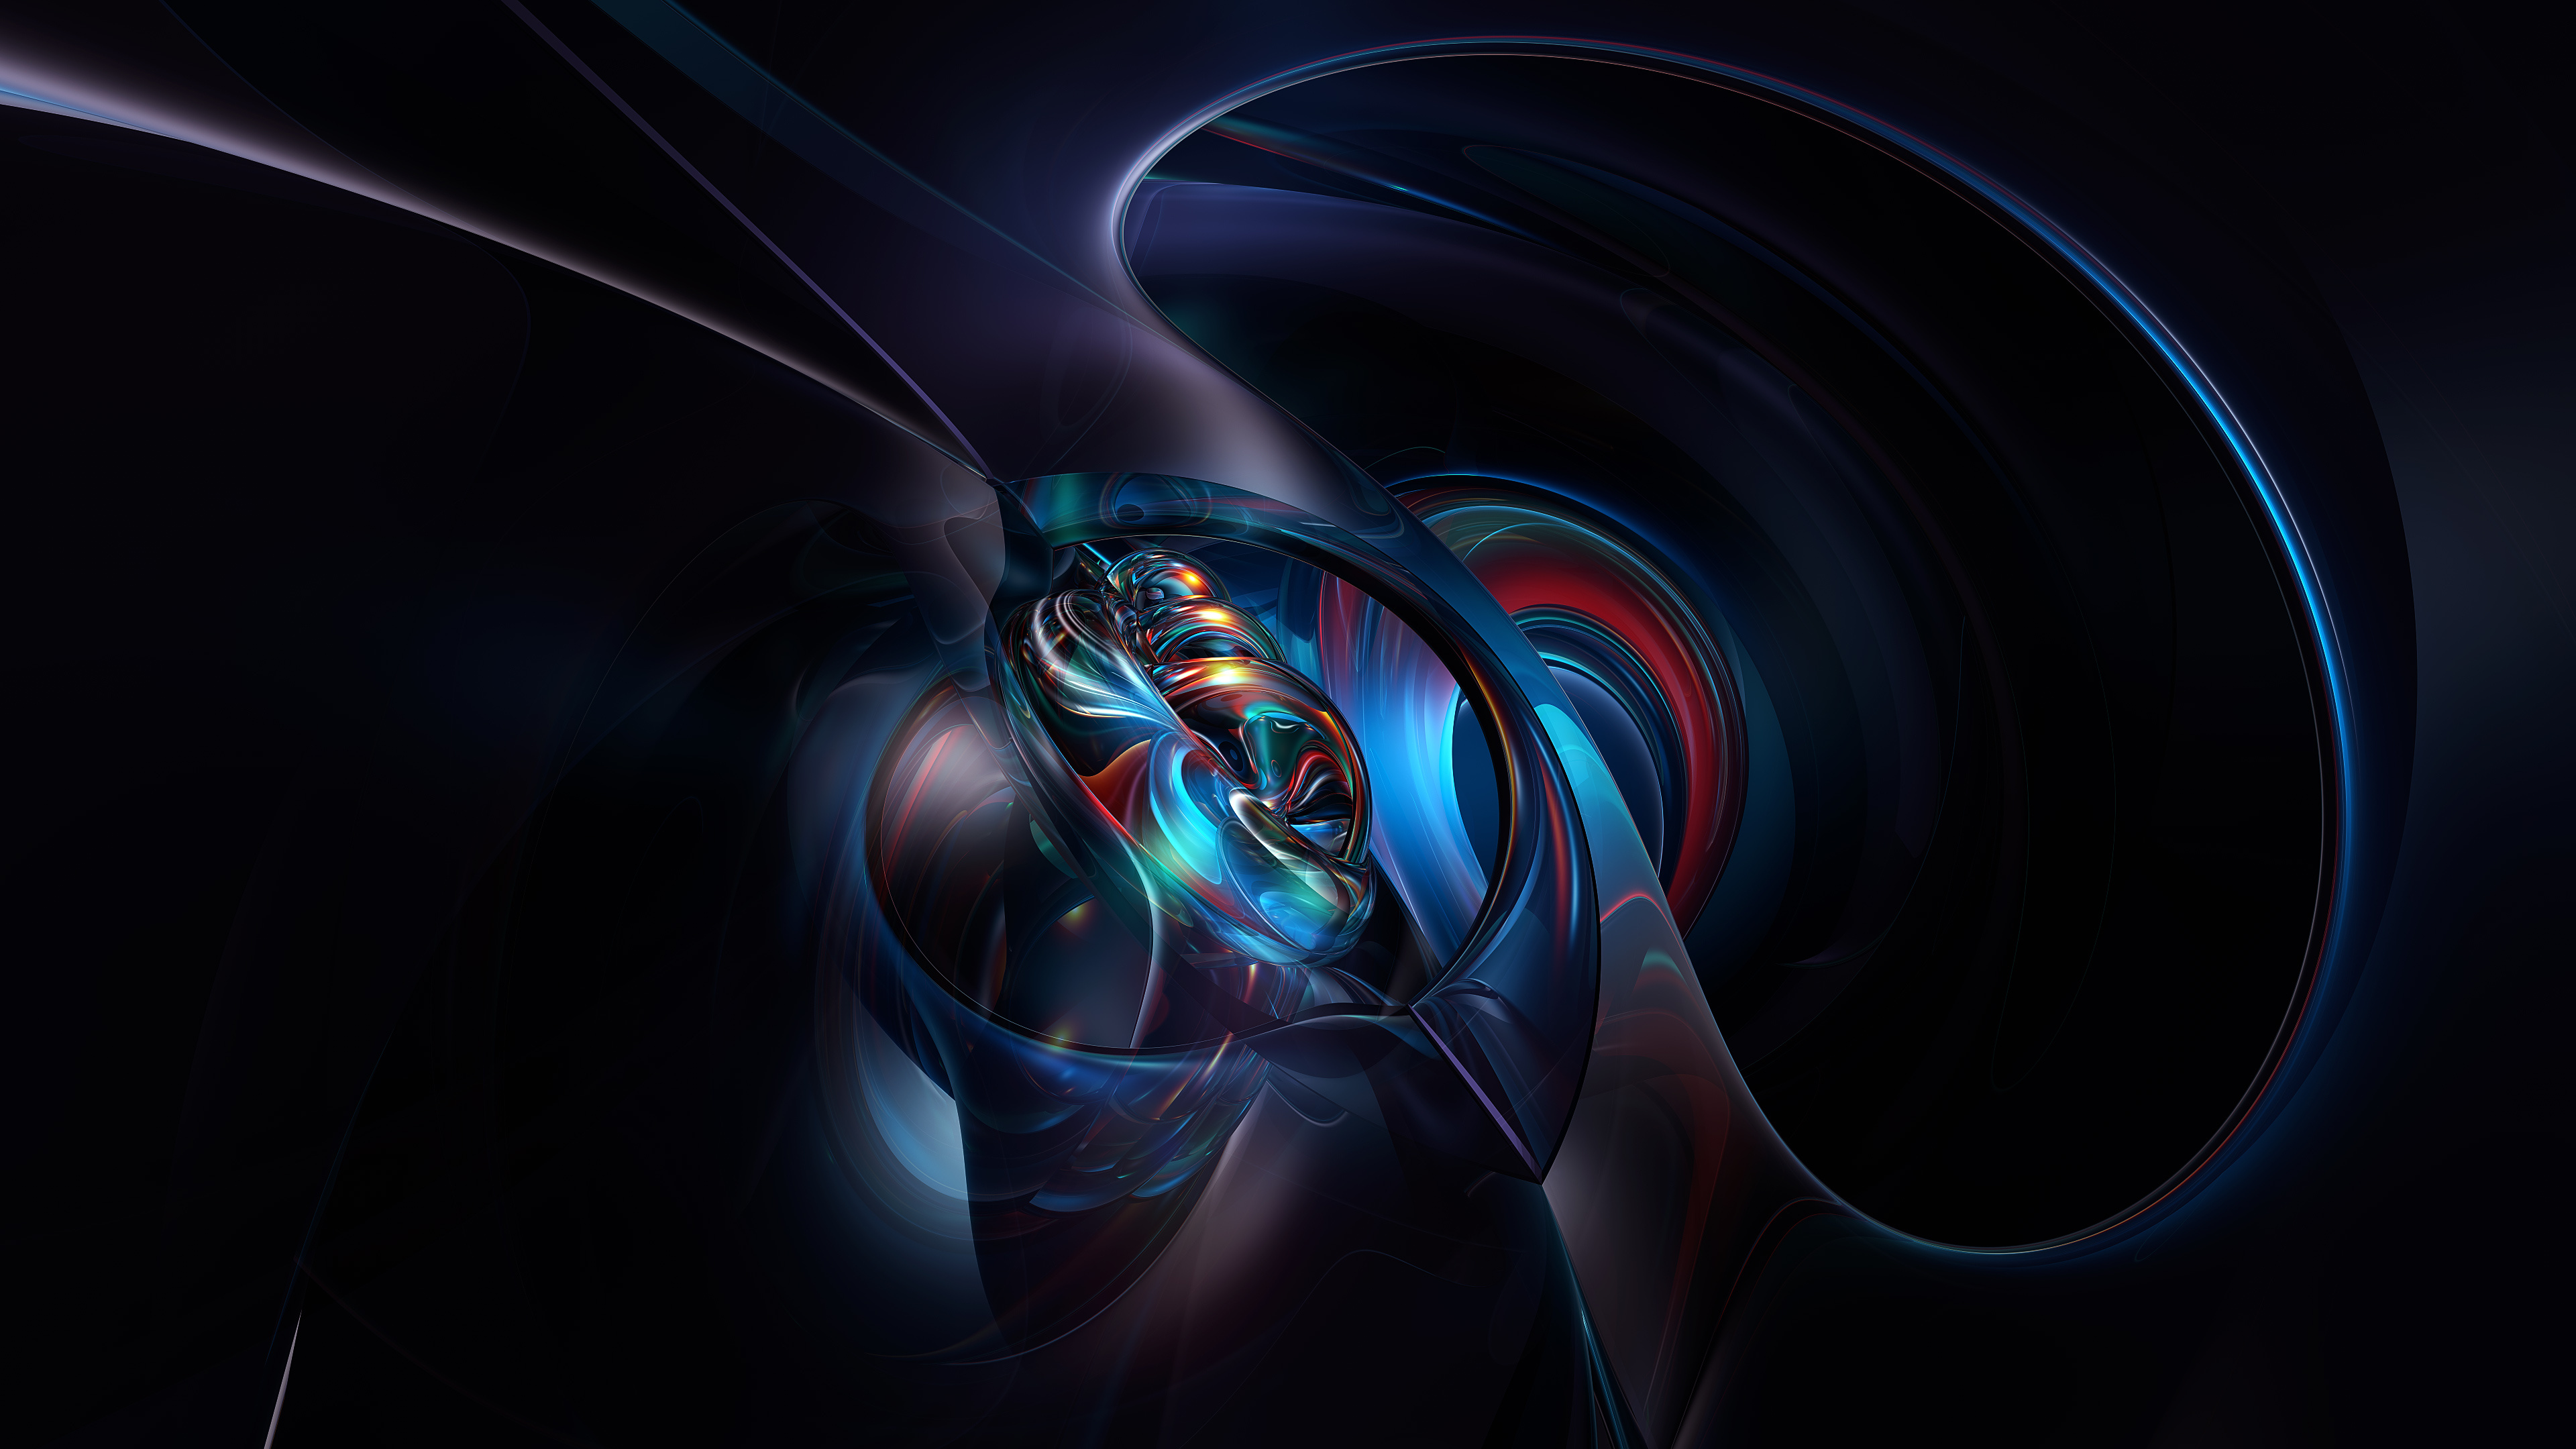 Graphic: Abstract visual elements, Chaotic pattern, Colorful flowing shapes. 3840x2160 4K Background.